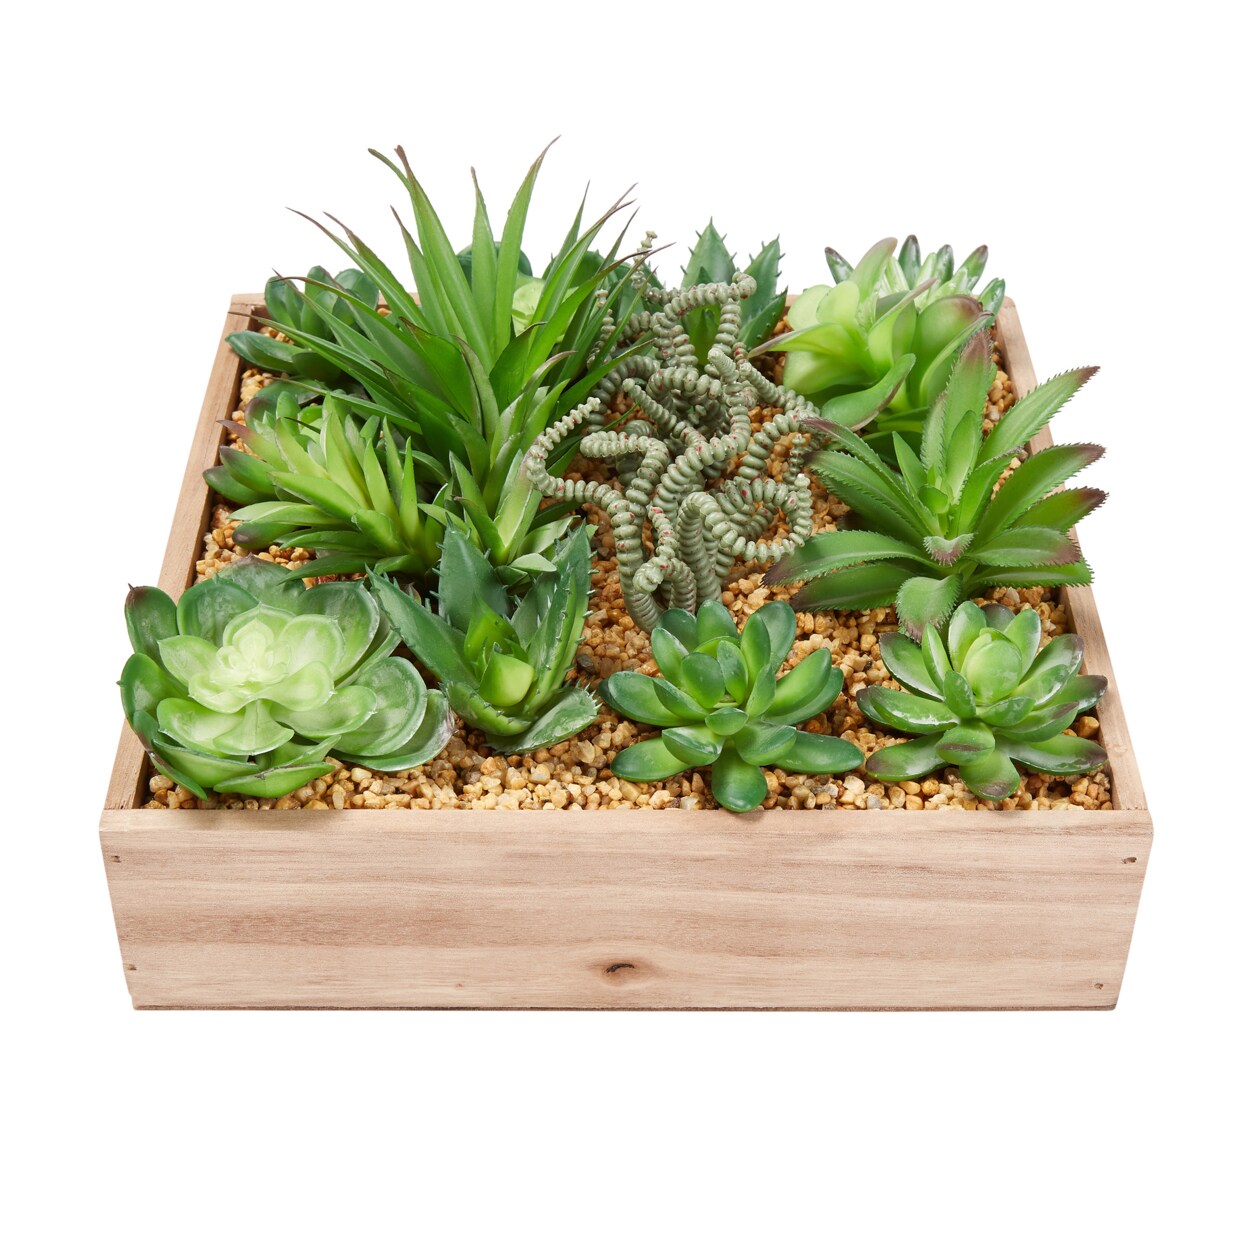 Pure Garden Faux Succulents Assorted Lifelike Plastic Greenery Arrangement with 10 Inch Decorative Wooden Box